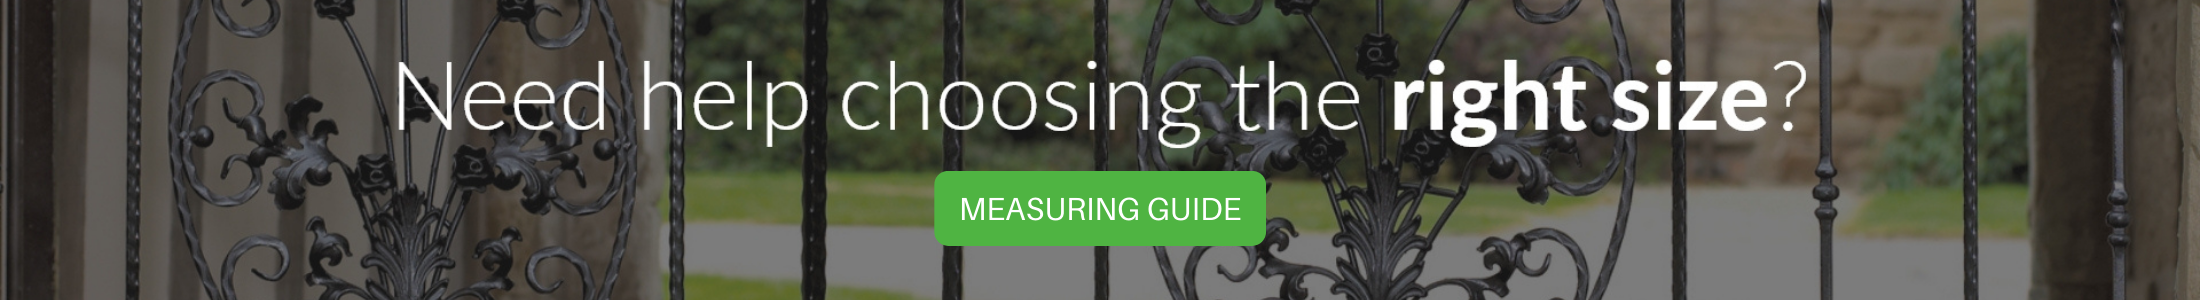 Take a look at the measuring guide if you need help choosing the appropriate gate width